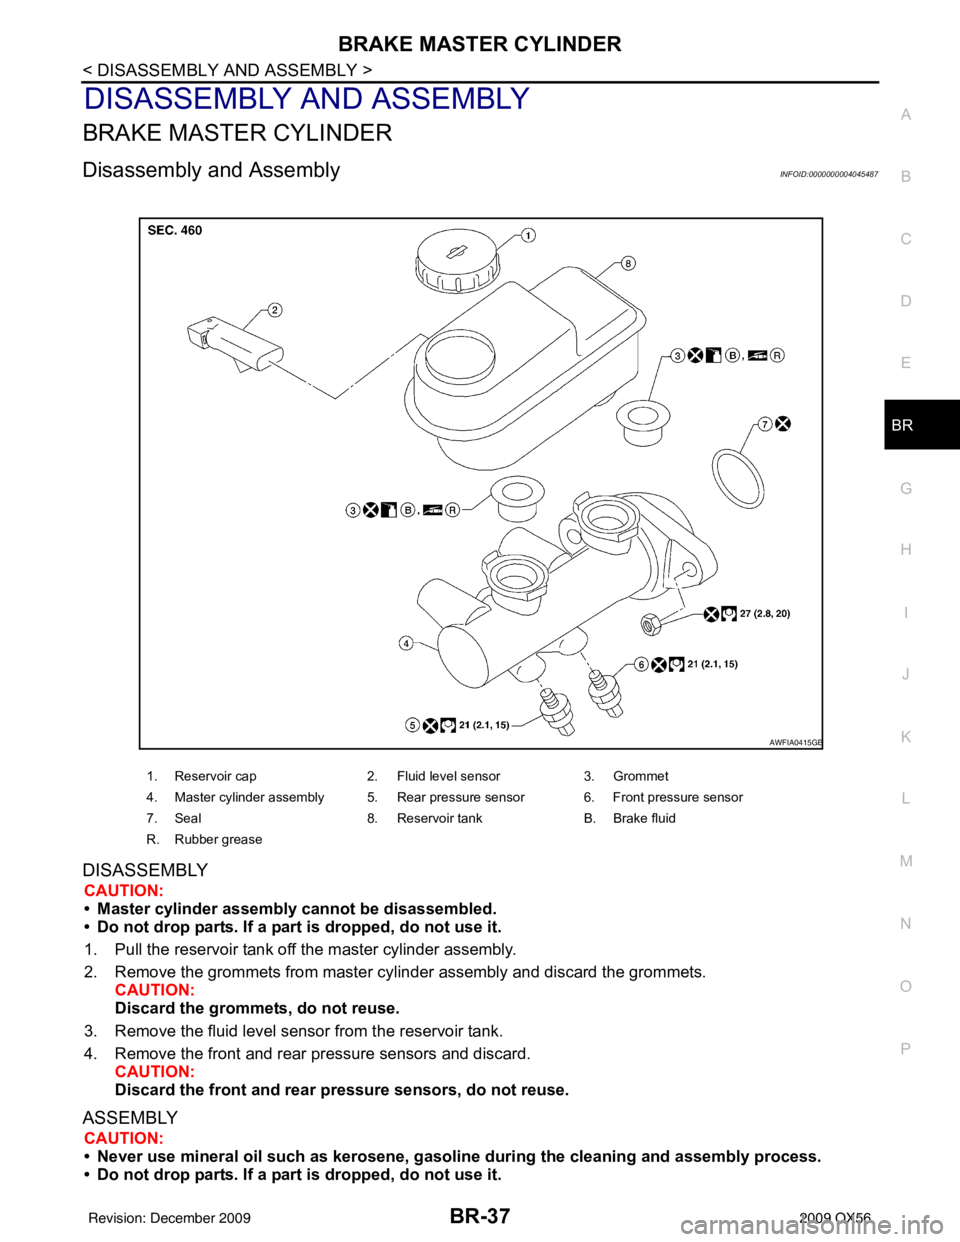 INFINITI QX56 2009  Factory Service Manual BRAKE MASTER CYLINDERBR-37
< DISASSEMBLY AND ASSEMBLY >
C
DE
G H
I
J
K L
M A
B
BR
N
O P
DISASSEMBLY AND ASSEMBLY
BRAKE MASTER CYLINDER
Disassembly and AssemblyINFOID:0000000004045487
DISASSEMBLY
CAUTI